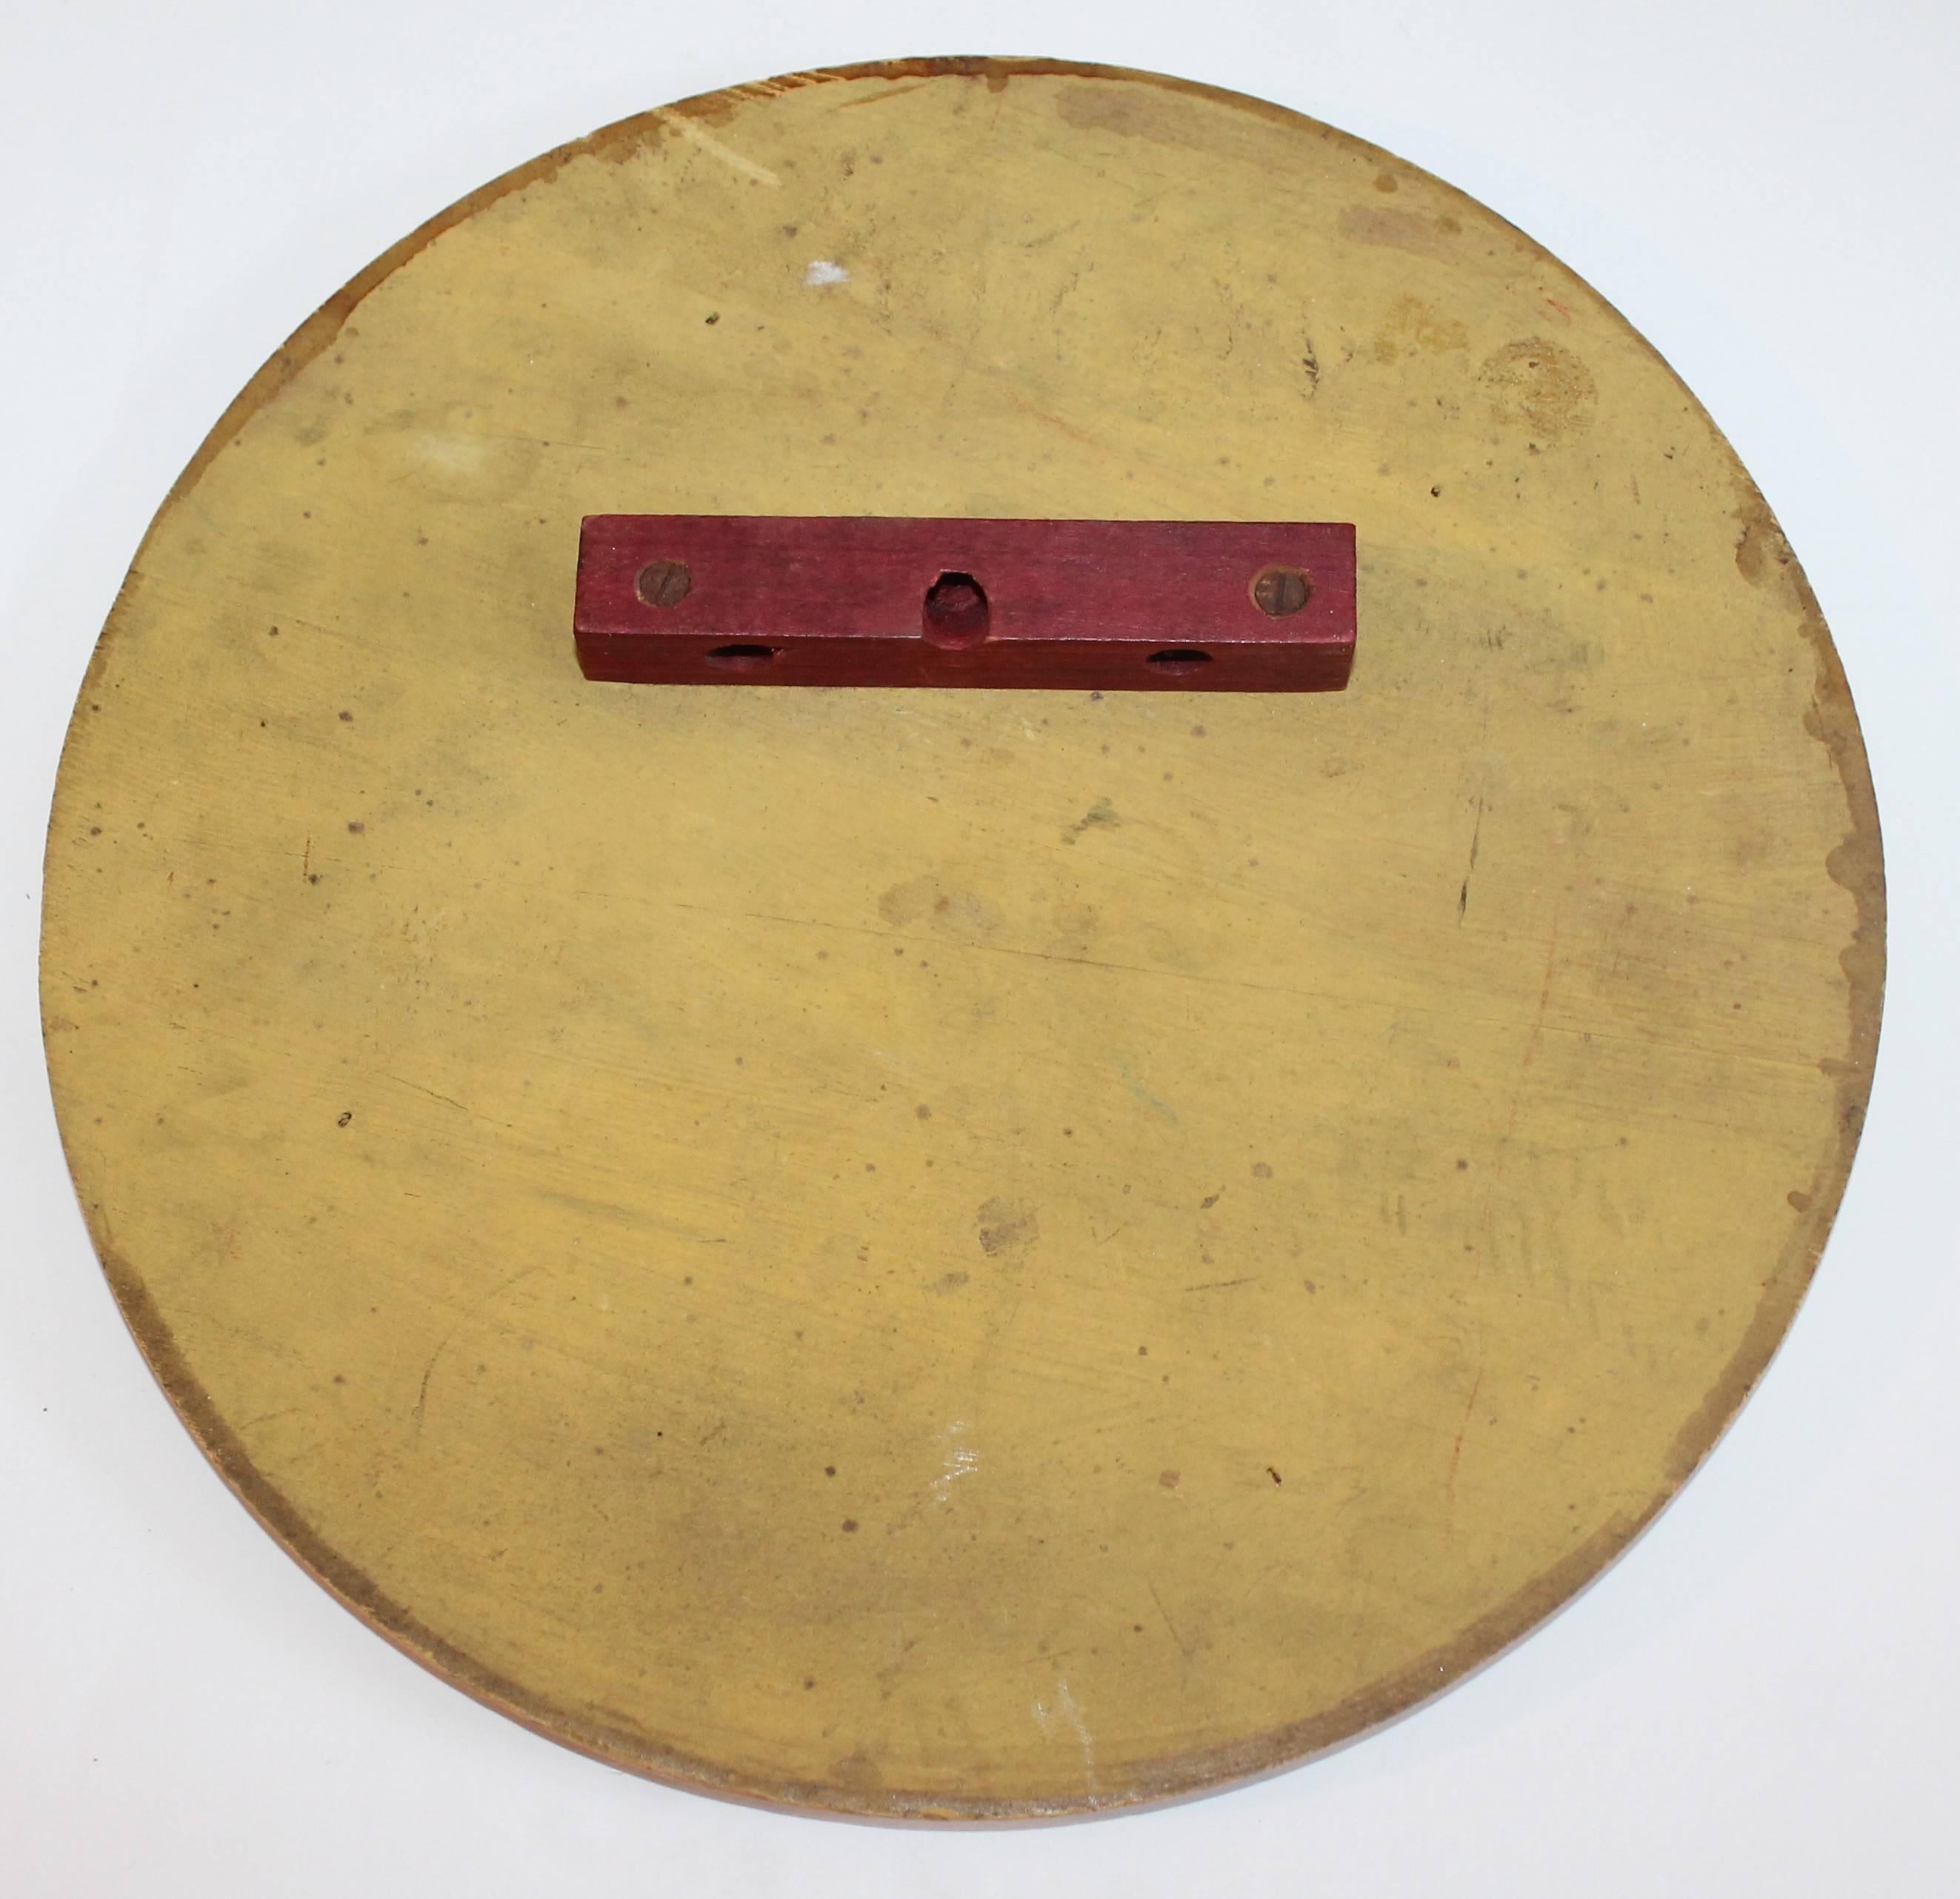 Hand-Painted Early 20th Century Original Painted Target Game Board